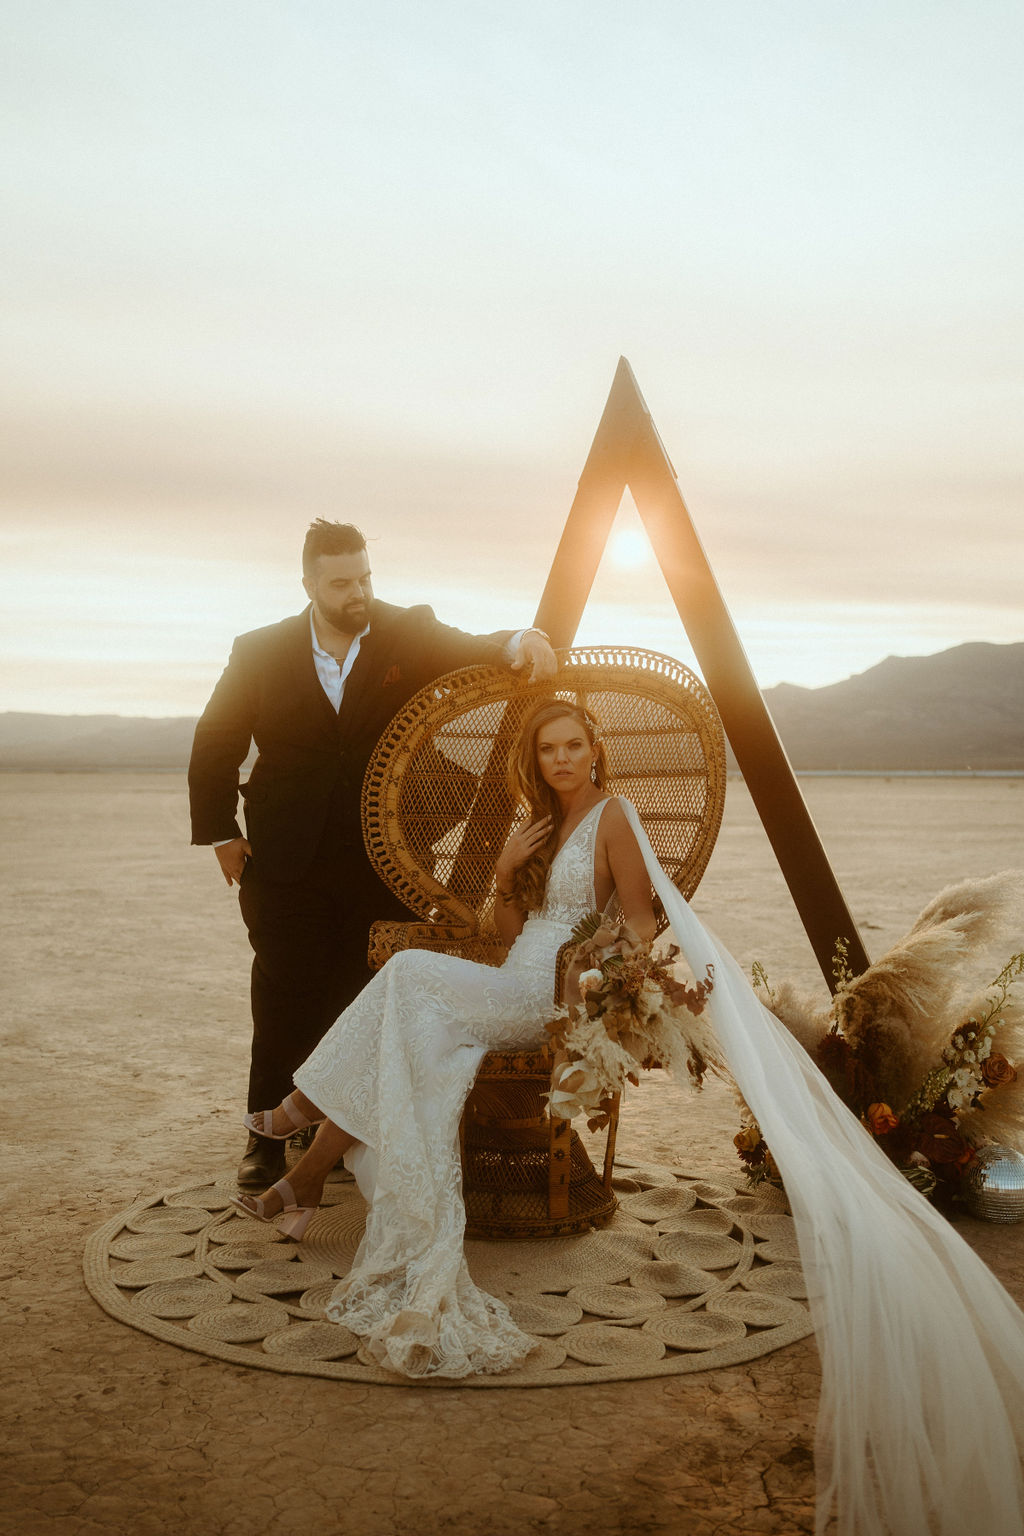 Bride Sitting on Peacock Chair by Triangle Arch and Boho Rug during Sun Set at Retro Disco Bohemian Micro-Wedding